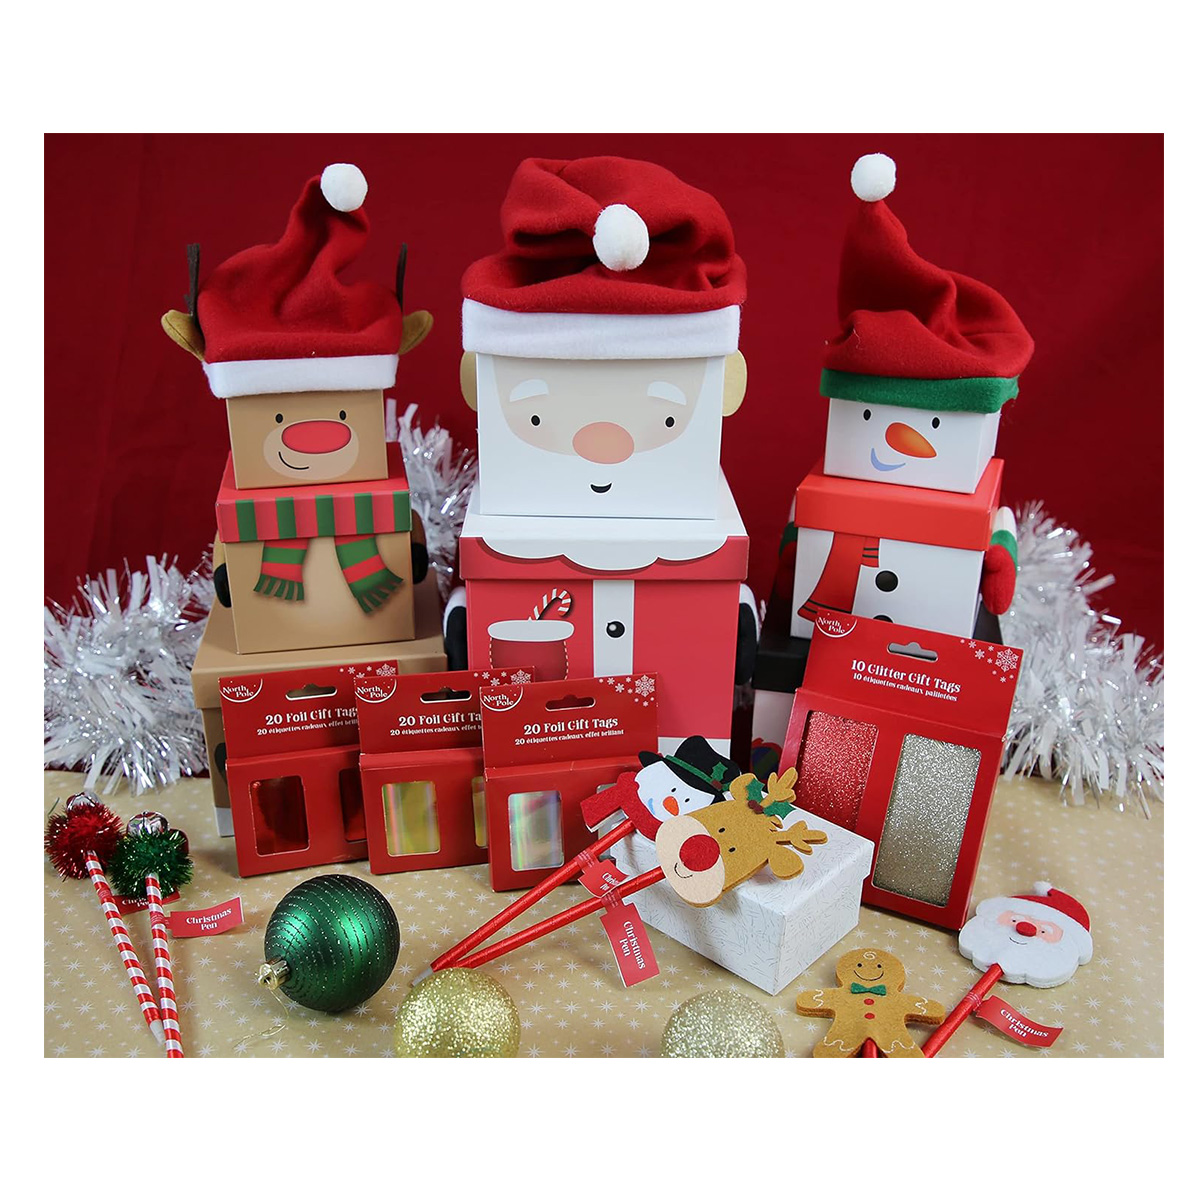 Clairefontaine gift boxes stackable, gift packaging - set of 3 Santa Claus